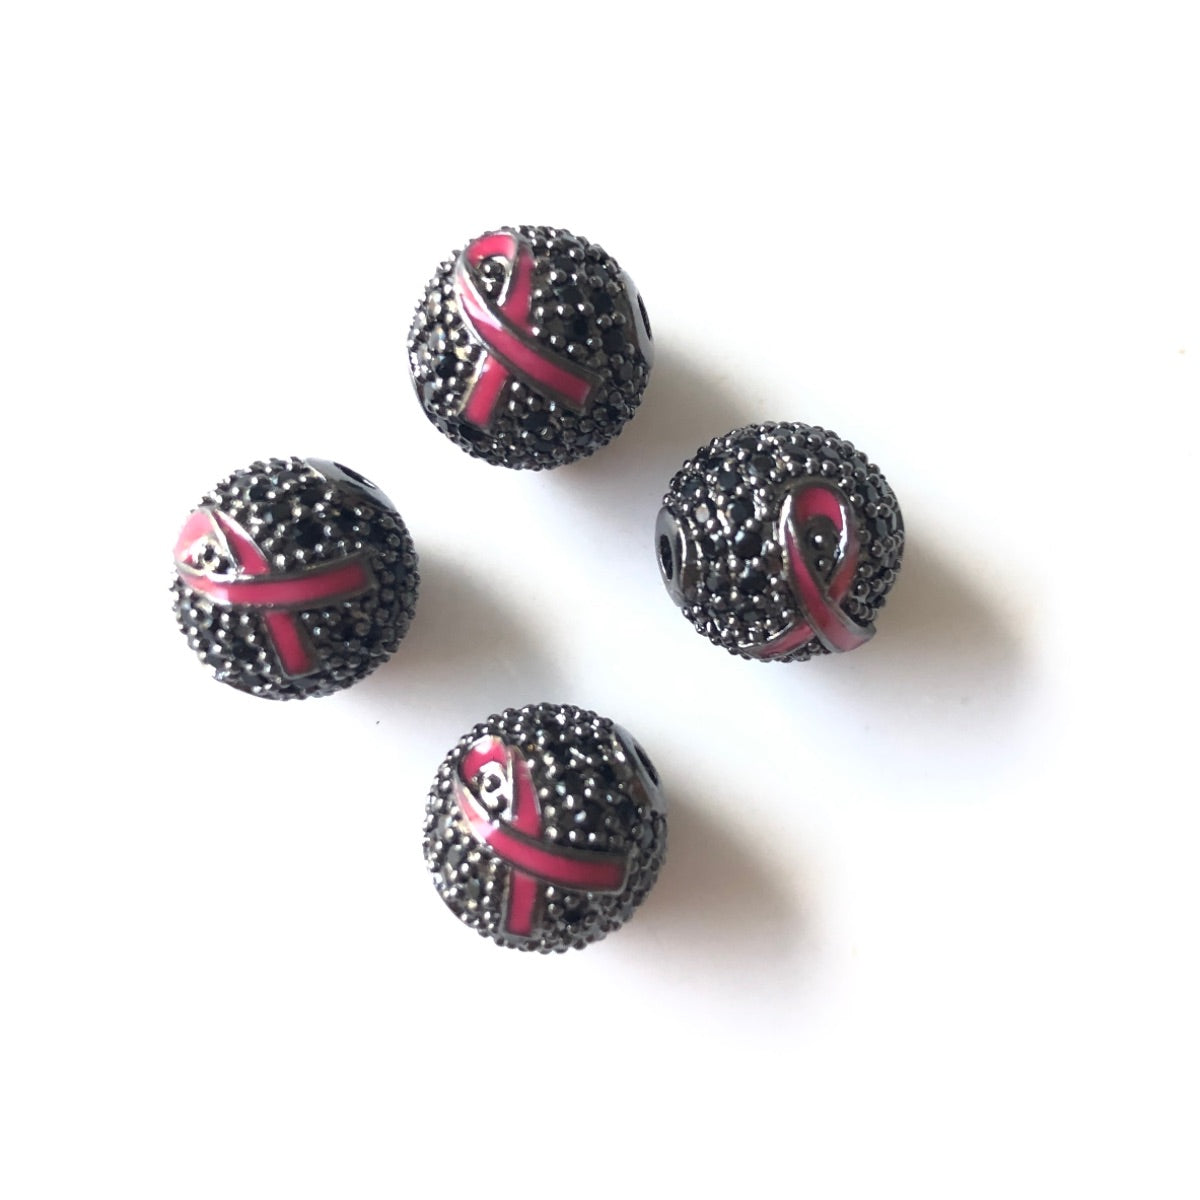 10-20-50pcs/lot 10mm CZ Paved Breast Cancer Awareness Pink Ribbon Ball Spacers Beads Black on Black CZ Paved Spacers 10mm Beads Ball Beads Breast Cancer Awareness New Spacers Arrivals Charms Beads Beyond